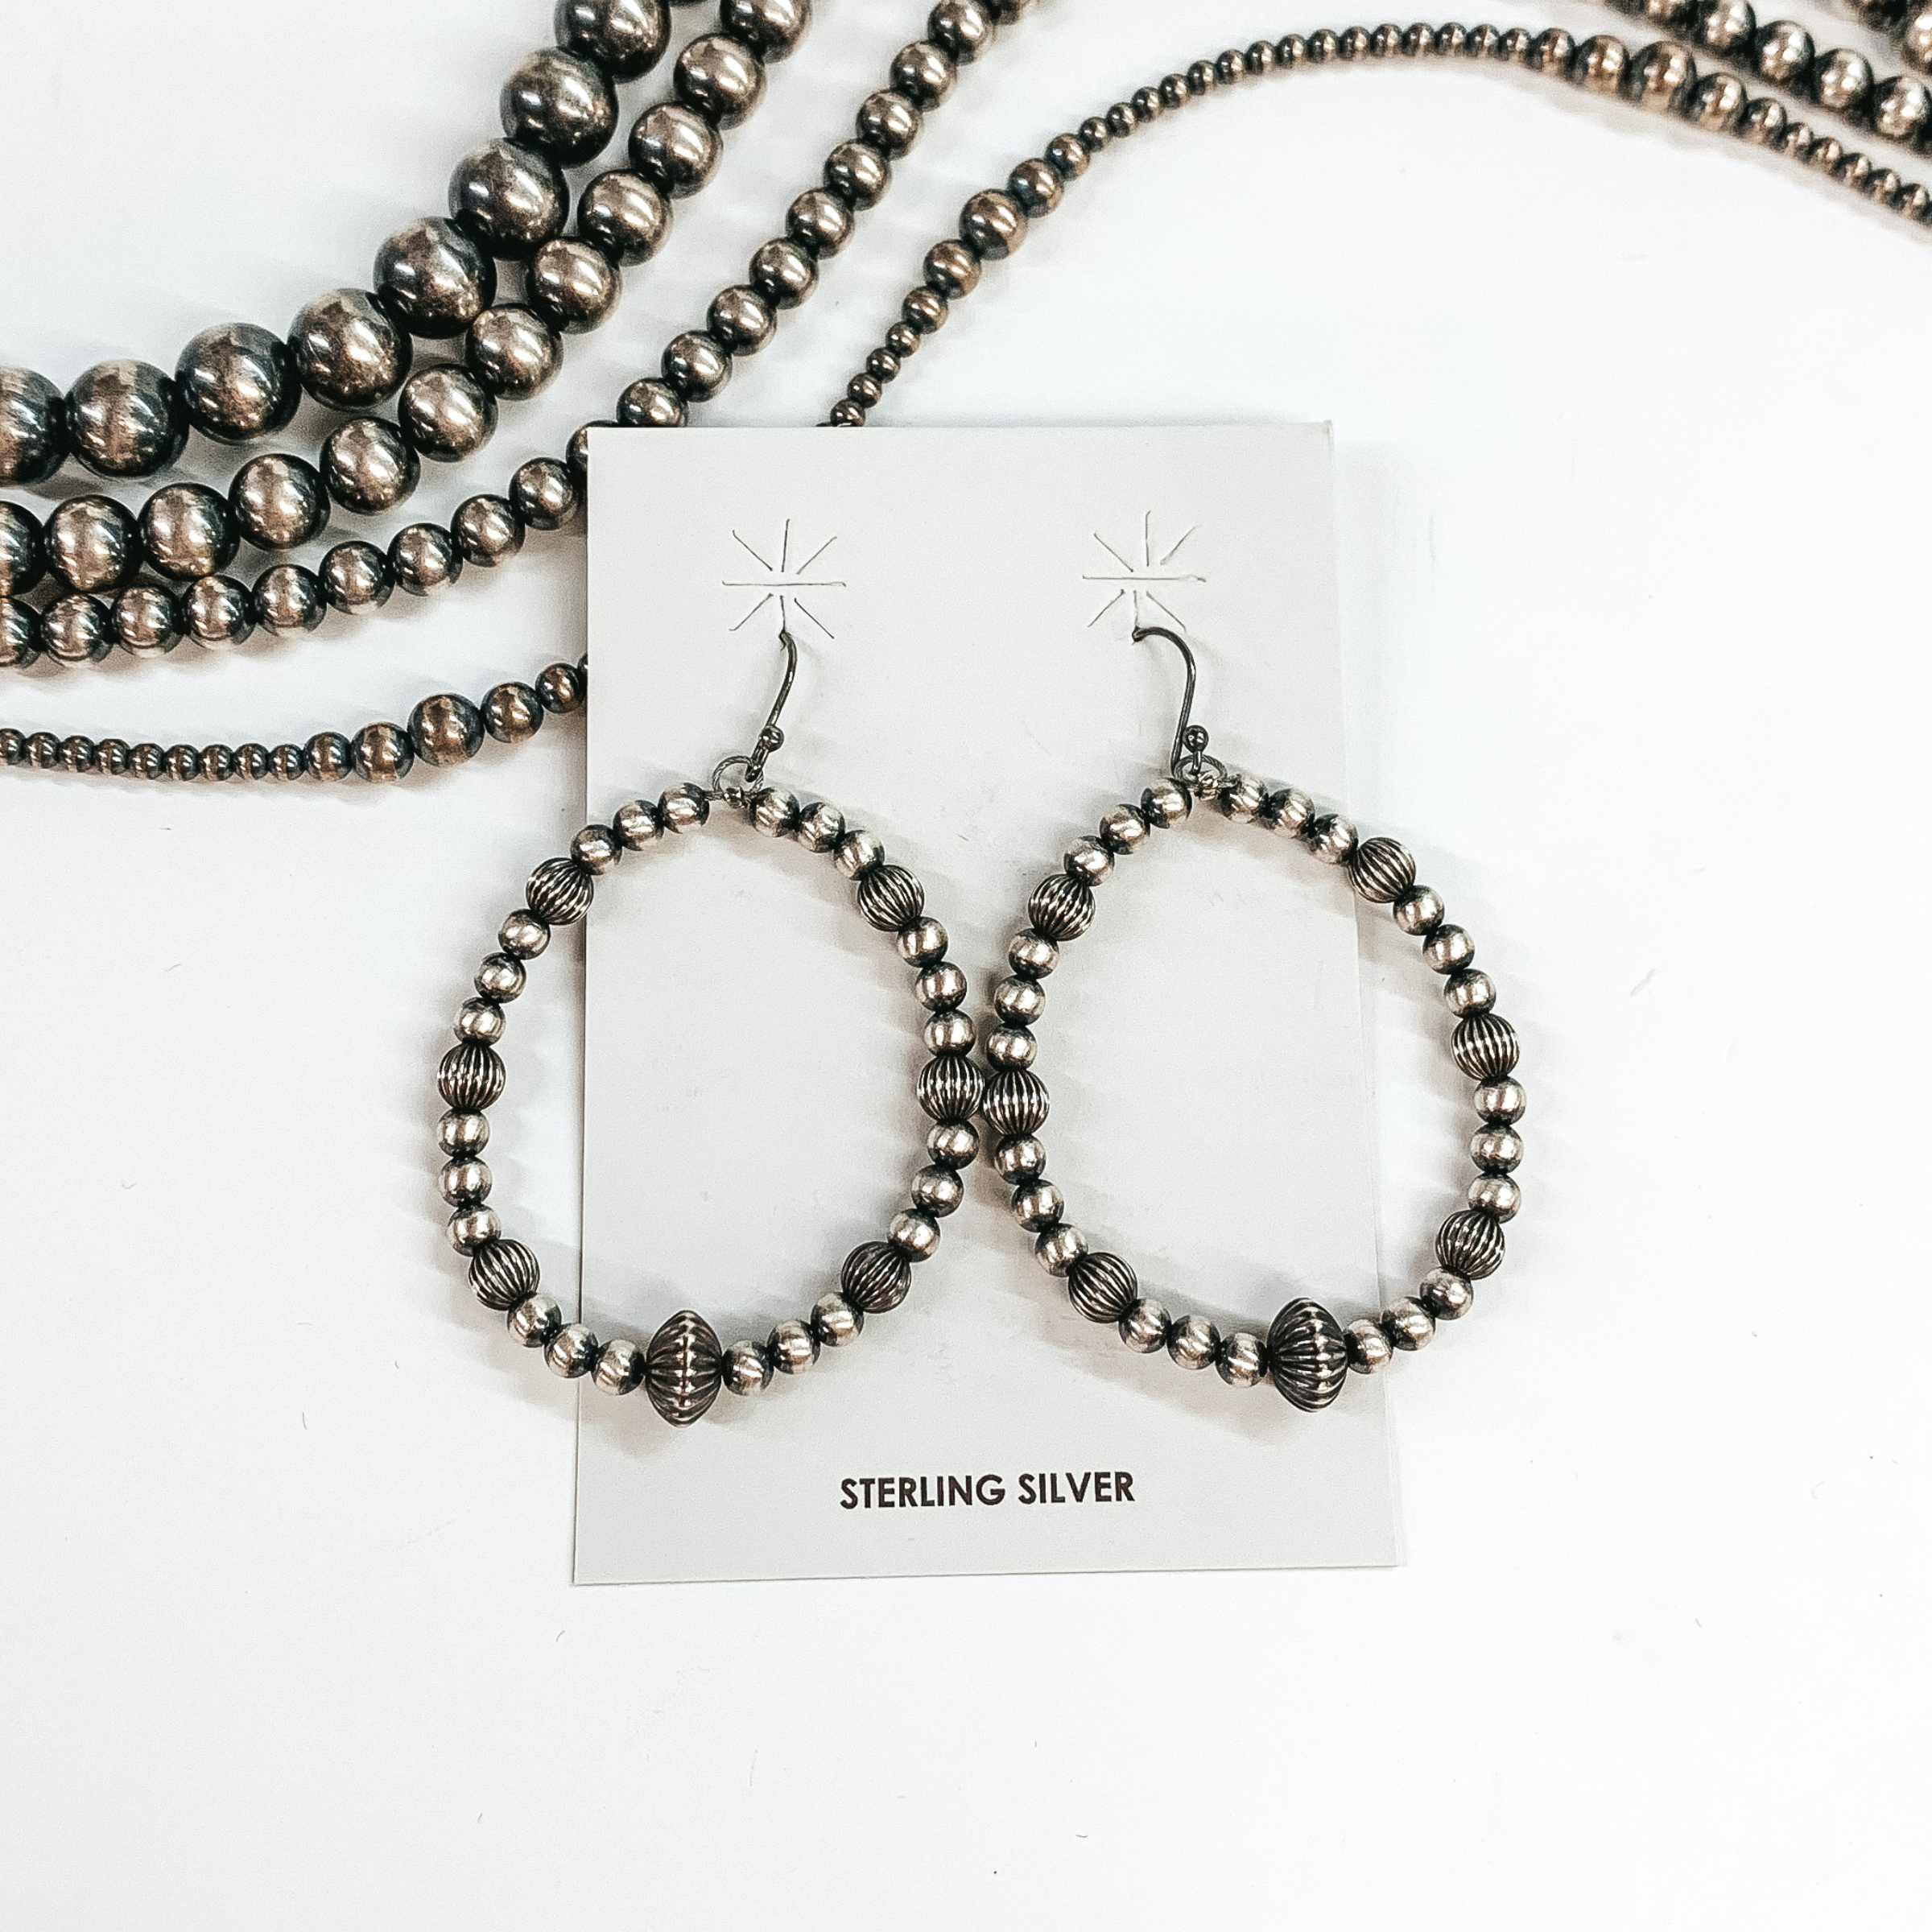 Navajo | Navajo Handmade Sterling Silver Navajo Pearl Teardrop Earrings with Textured Spacers - Giddy Up Glamour Boutique